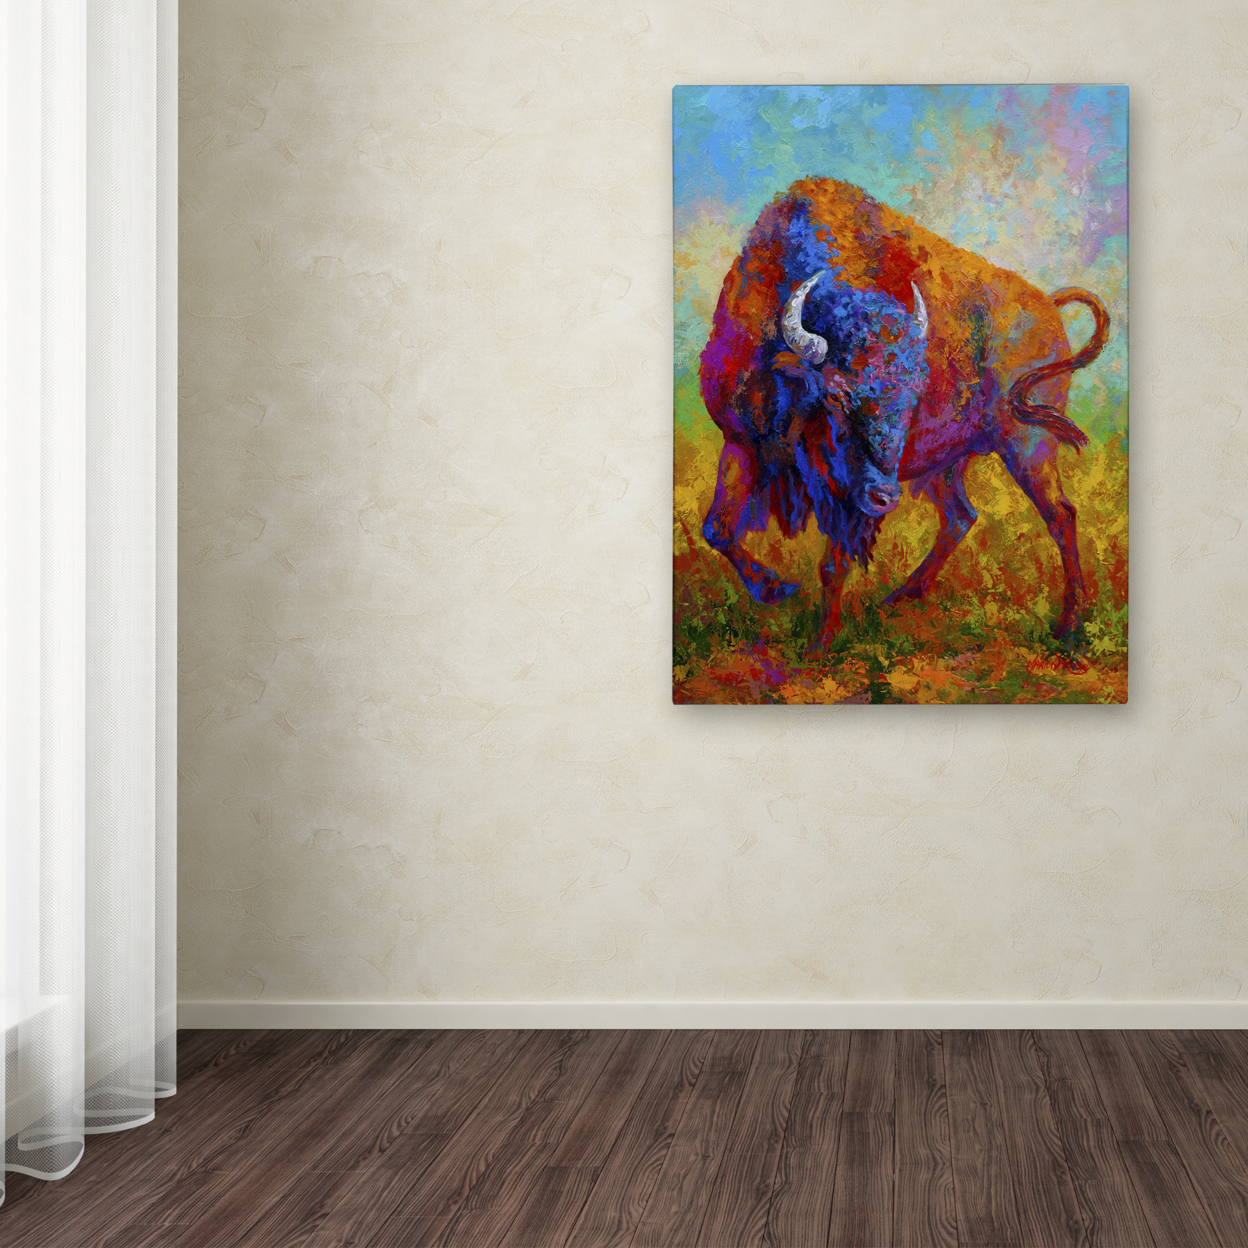 Marion Rose 'Bison Bull 1' Ready To Hang Canvas Art 18 X 24 Inches Made In USA